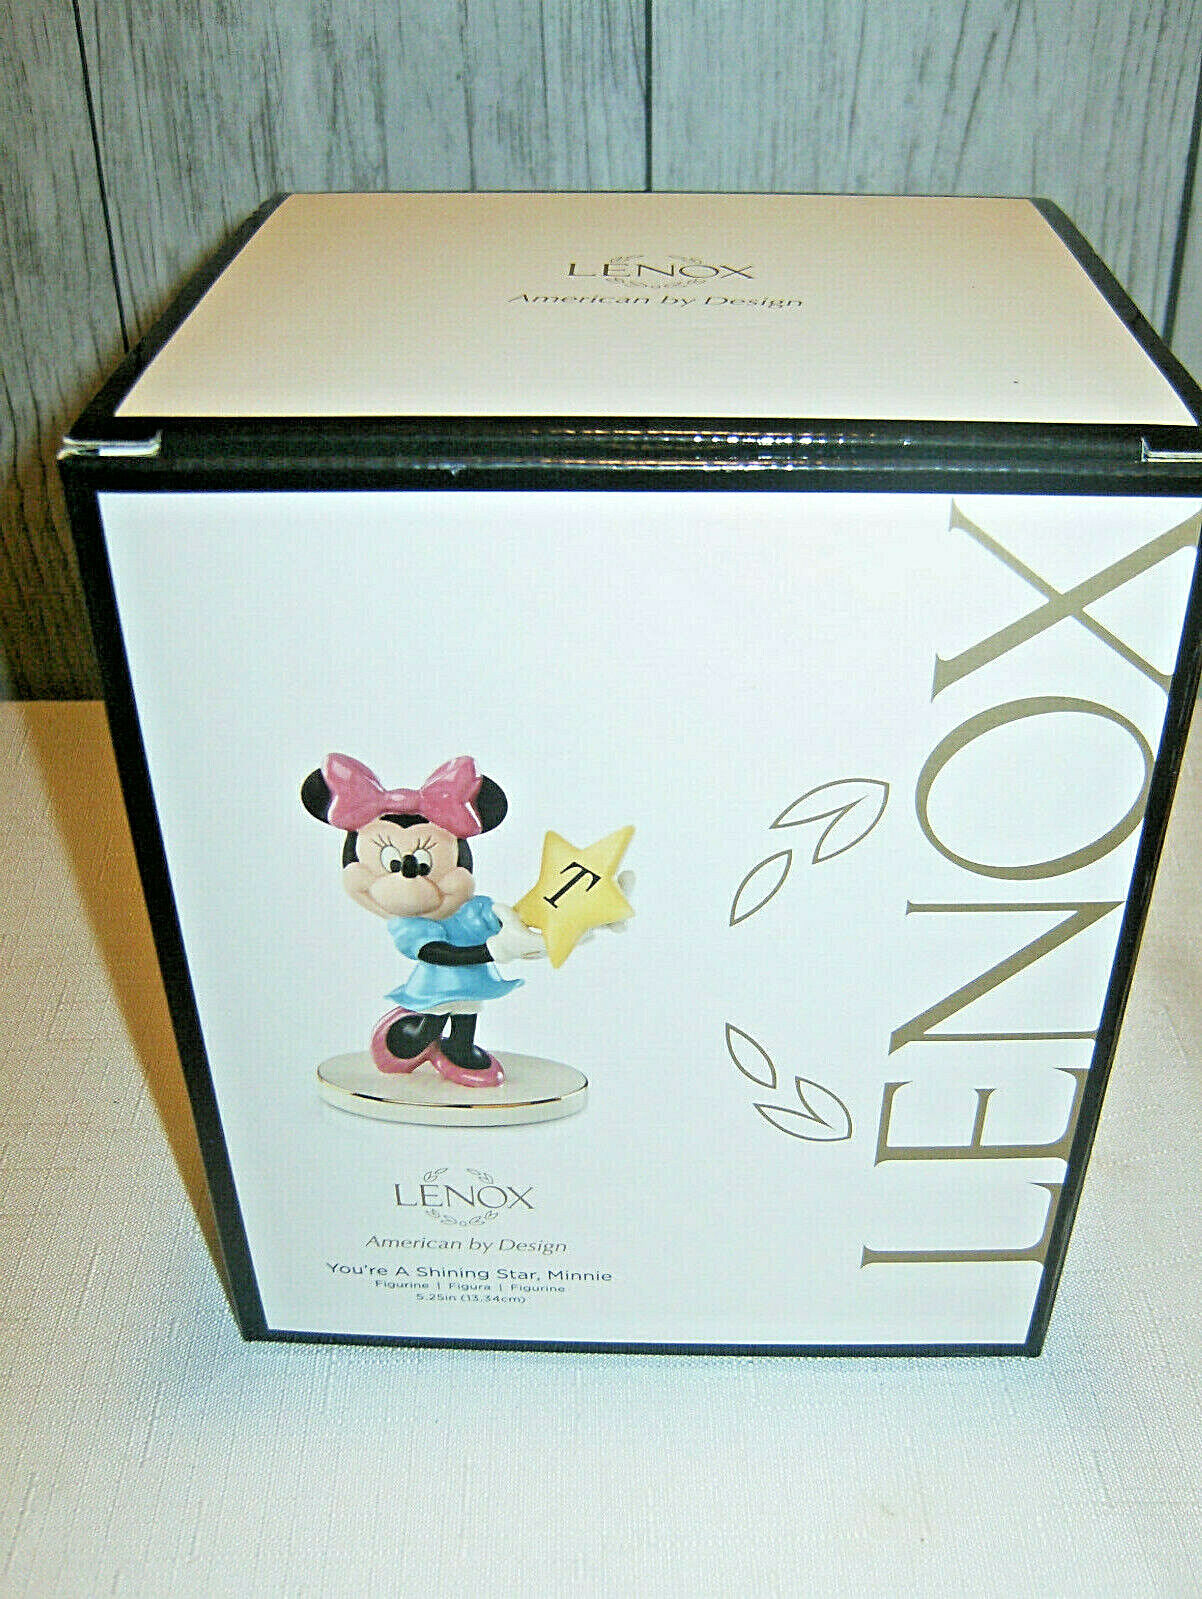 Brand New Lenox Disney You\'re A Shining Star Minnie Mouse Letter T Figurine